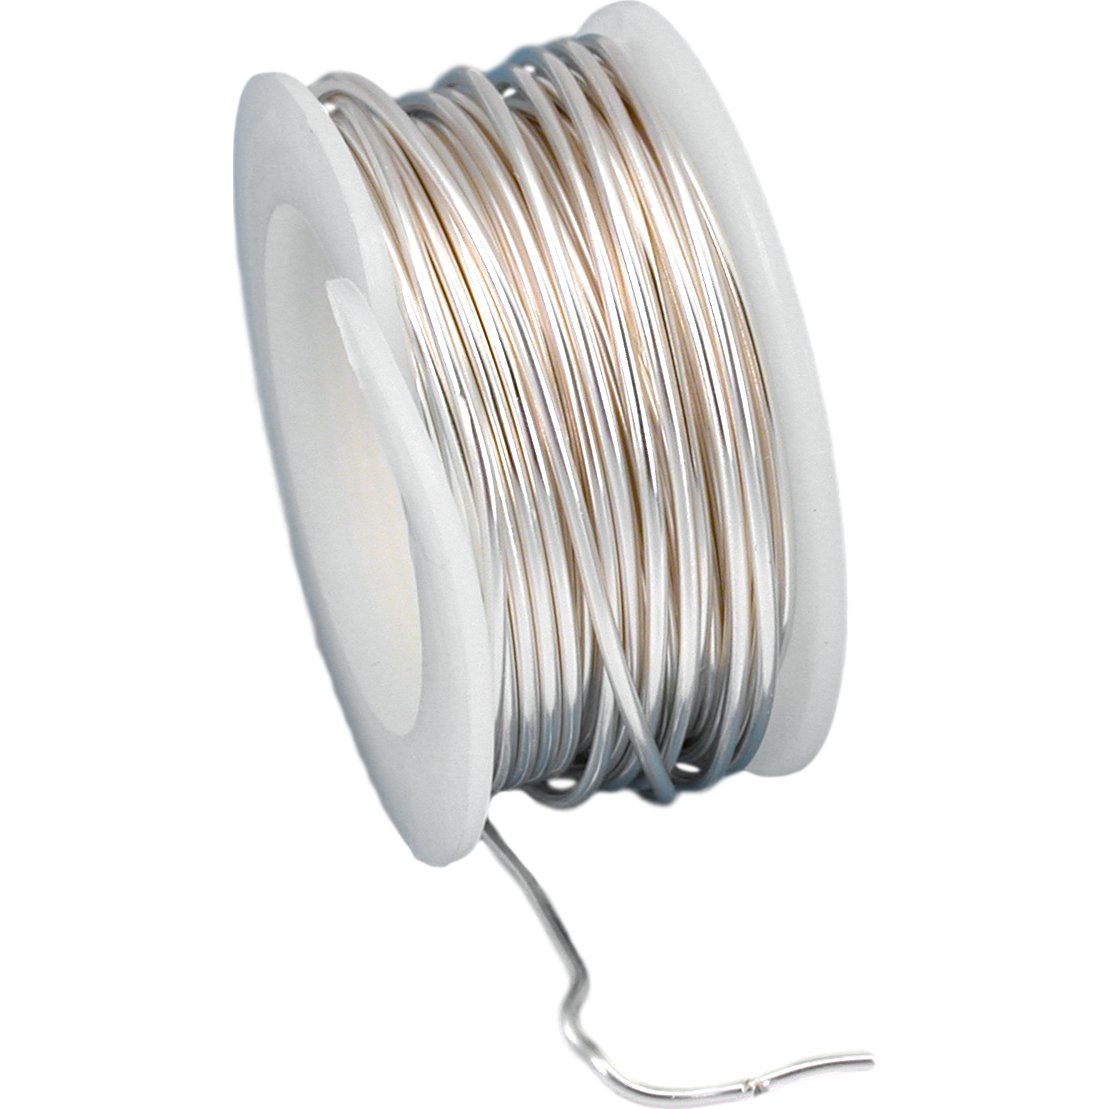 Artistic Wire Spool Silver Plated 18 Gauge 3.6M